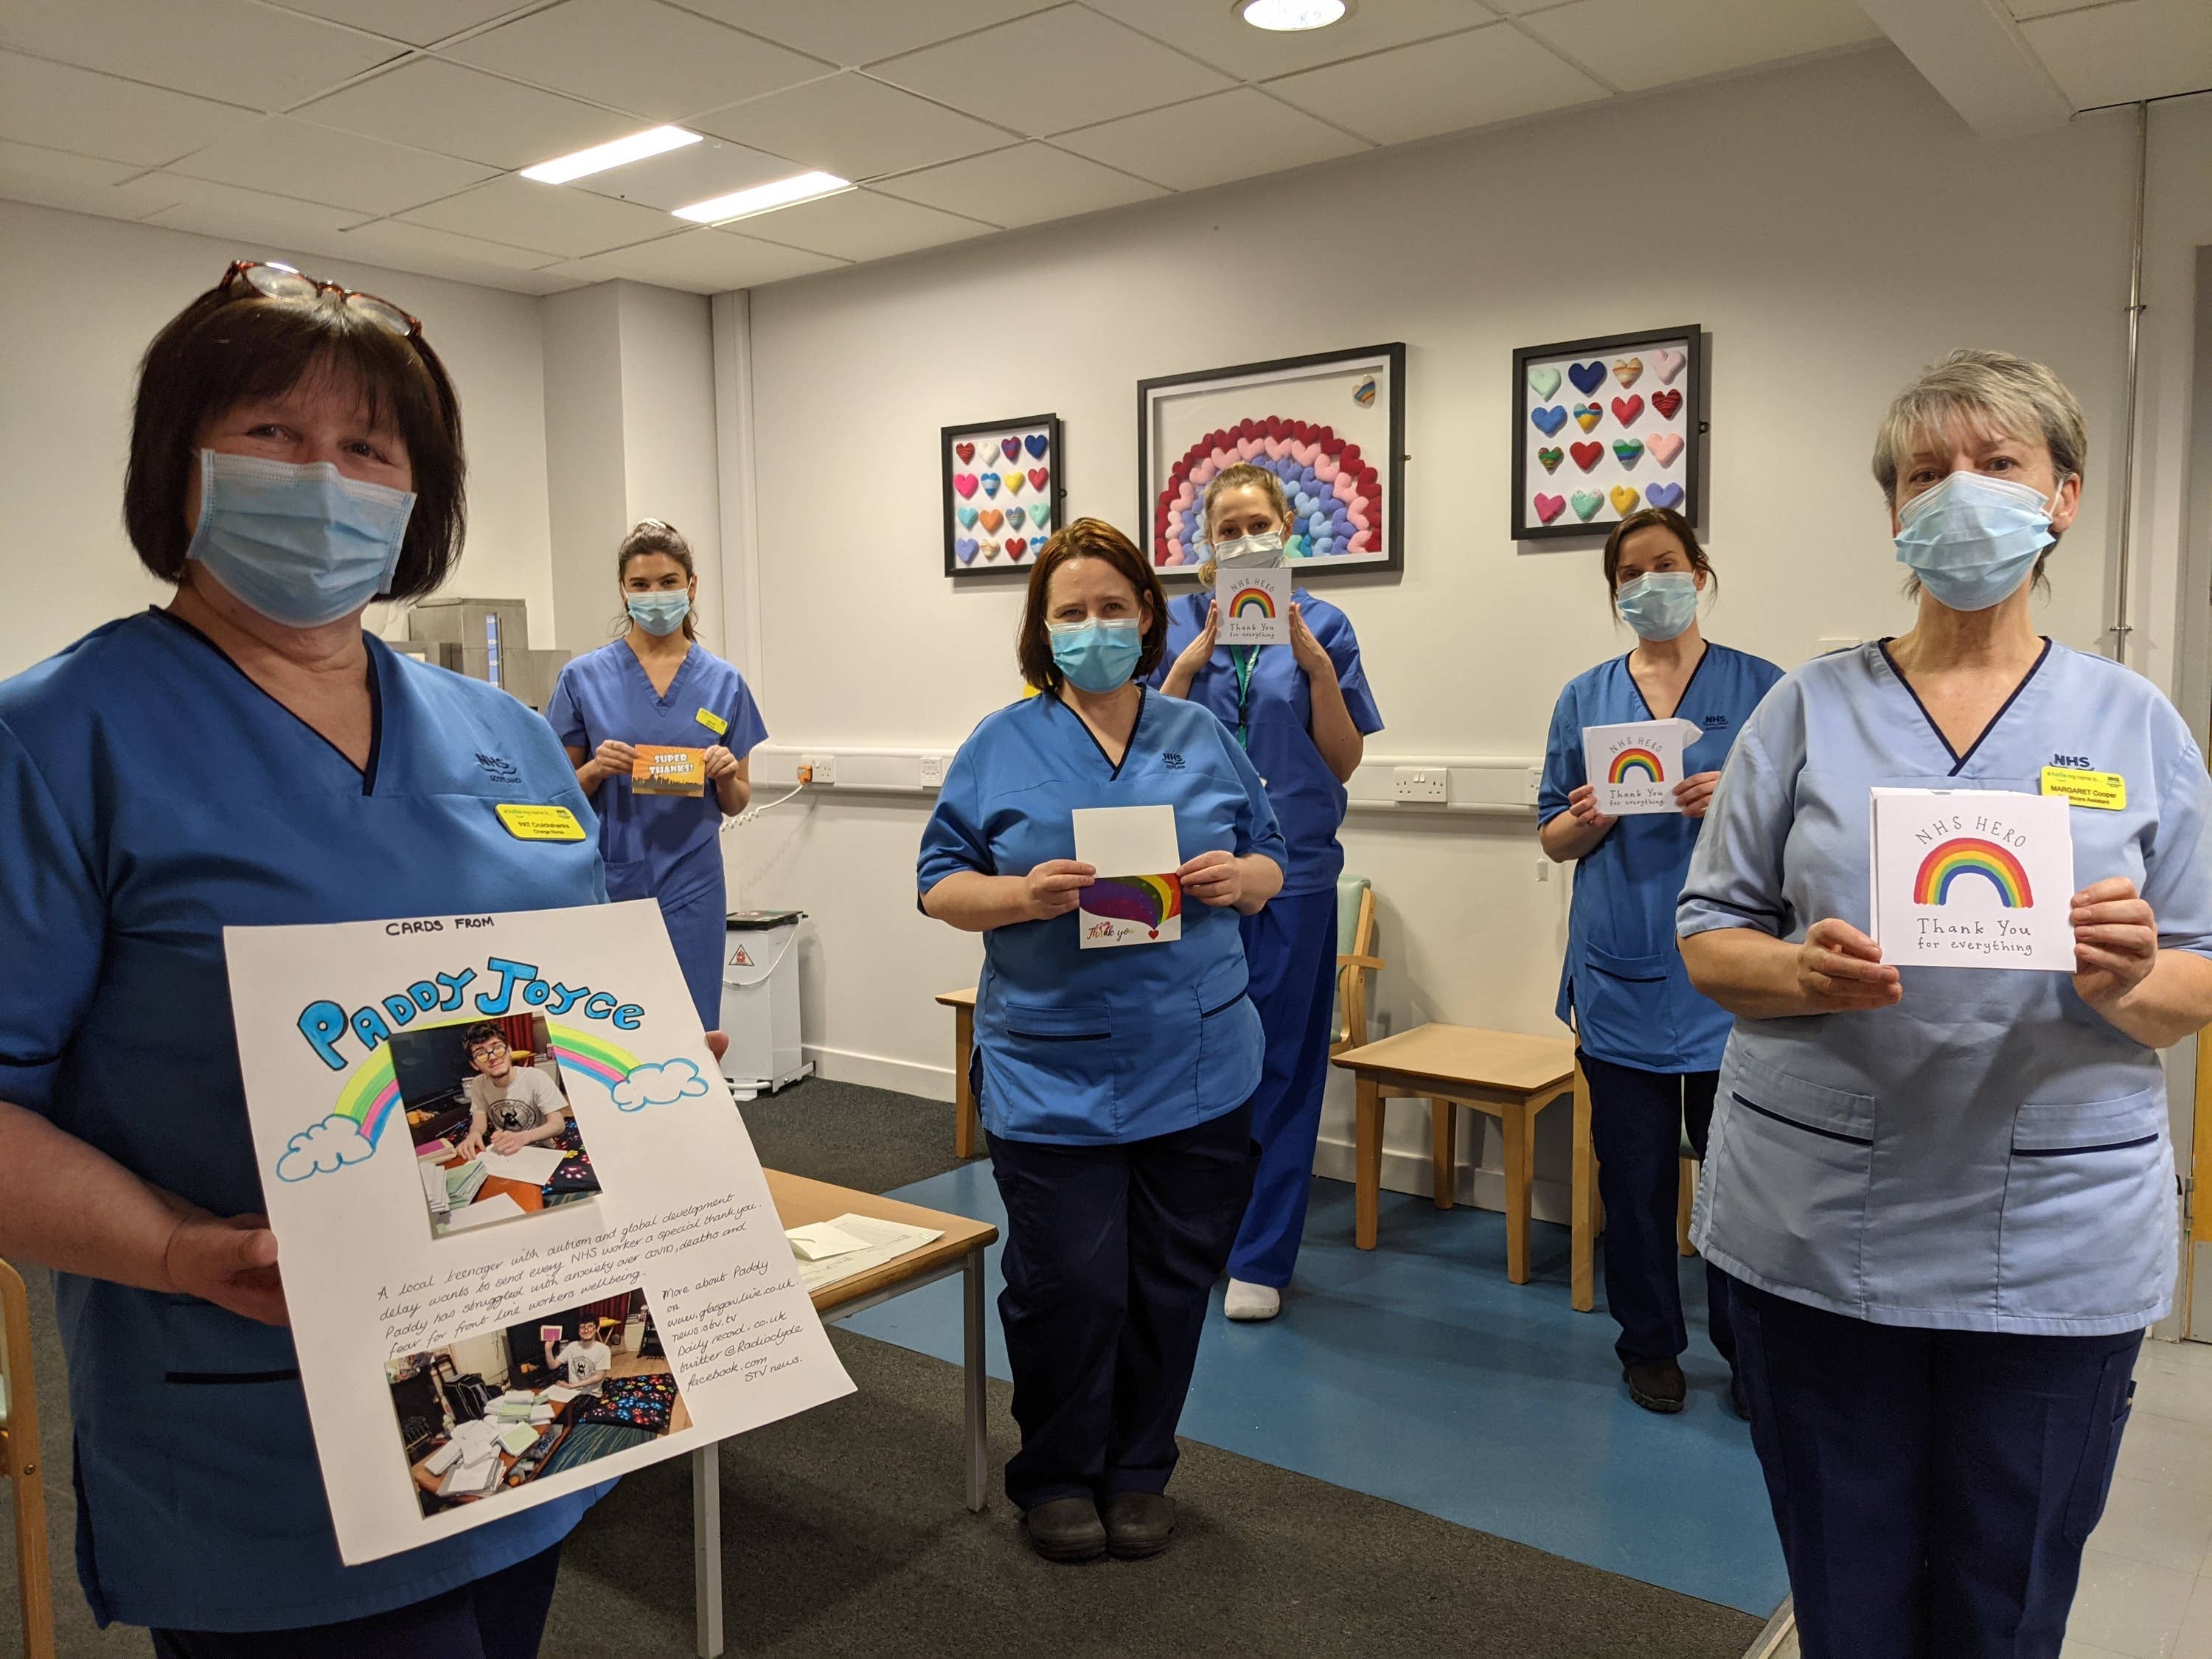 Hospital staff have been touched to receive the cards (NHSGGC/PA)